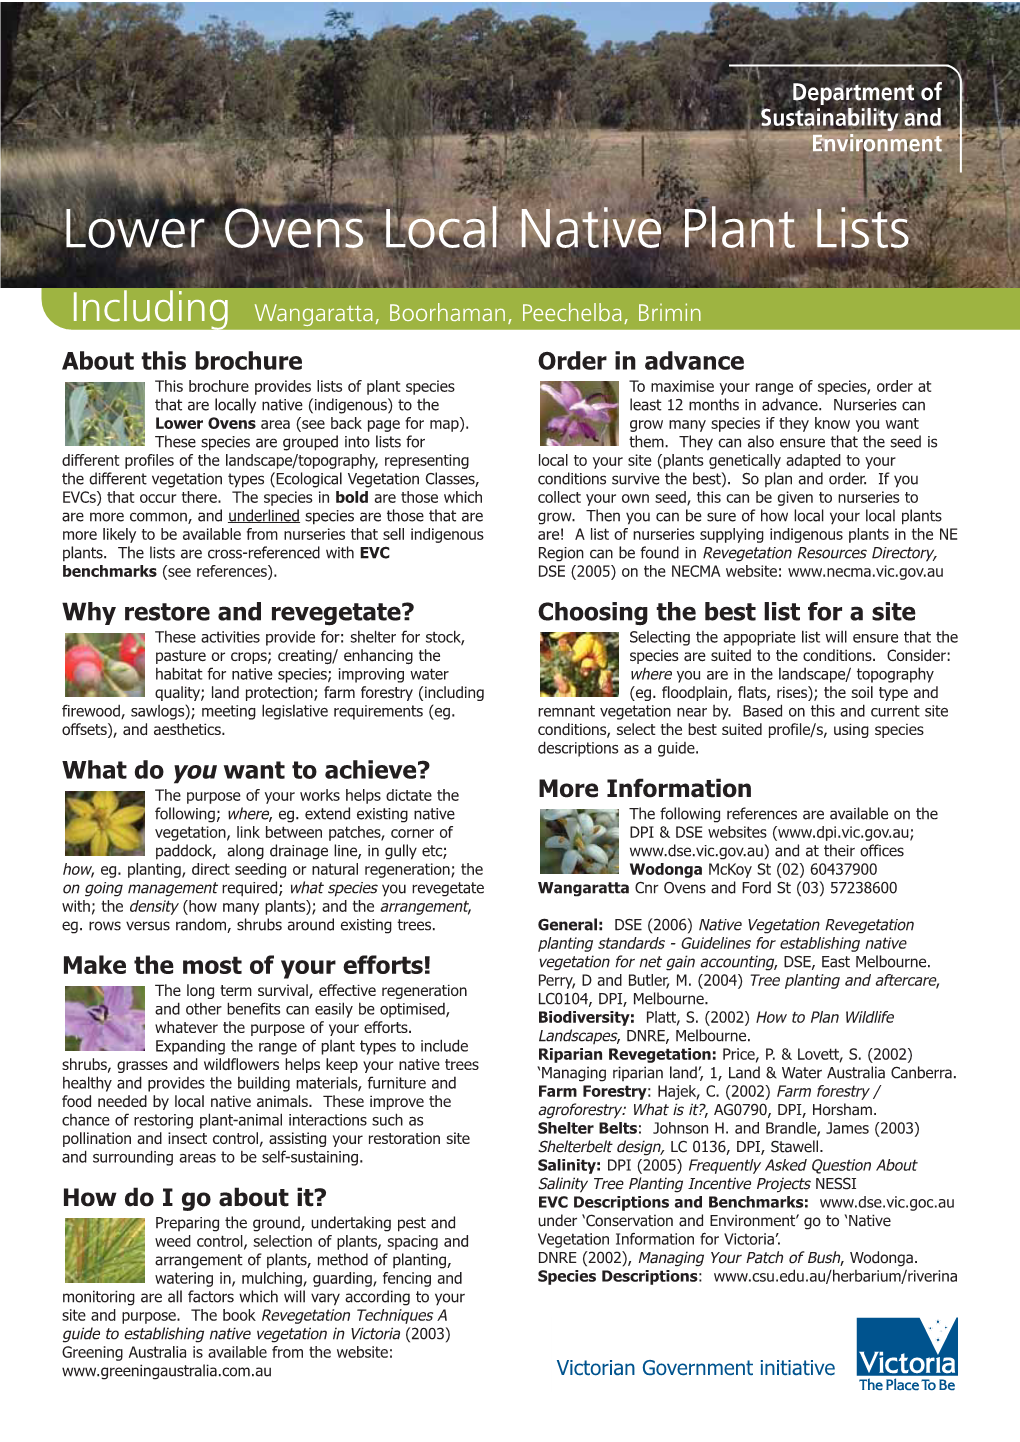 Lower Ovens Local Native Plant Lists